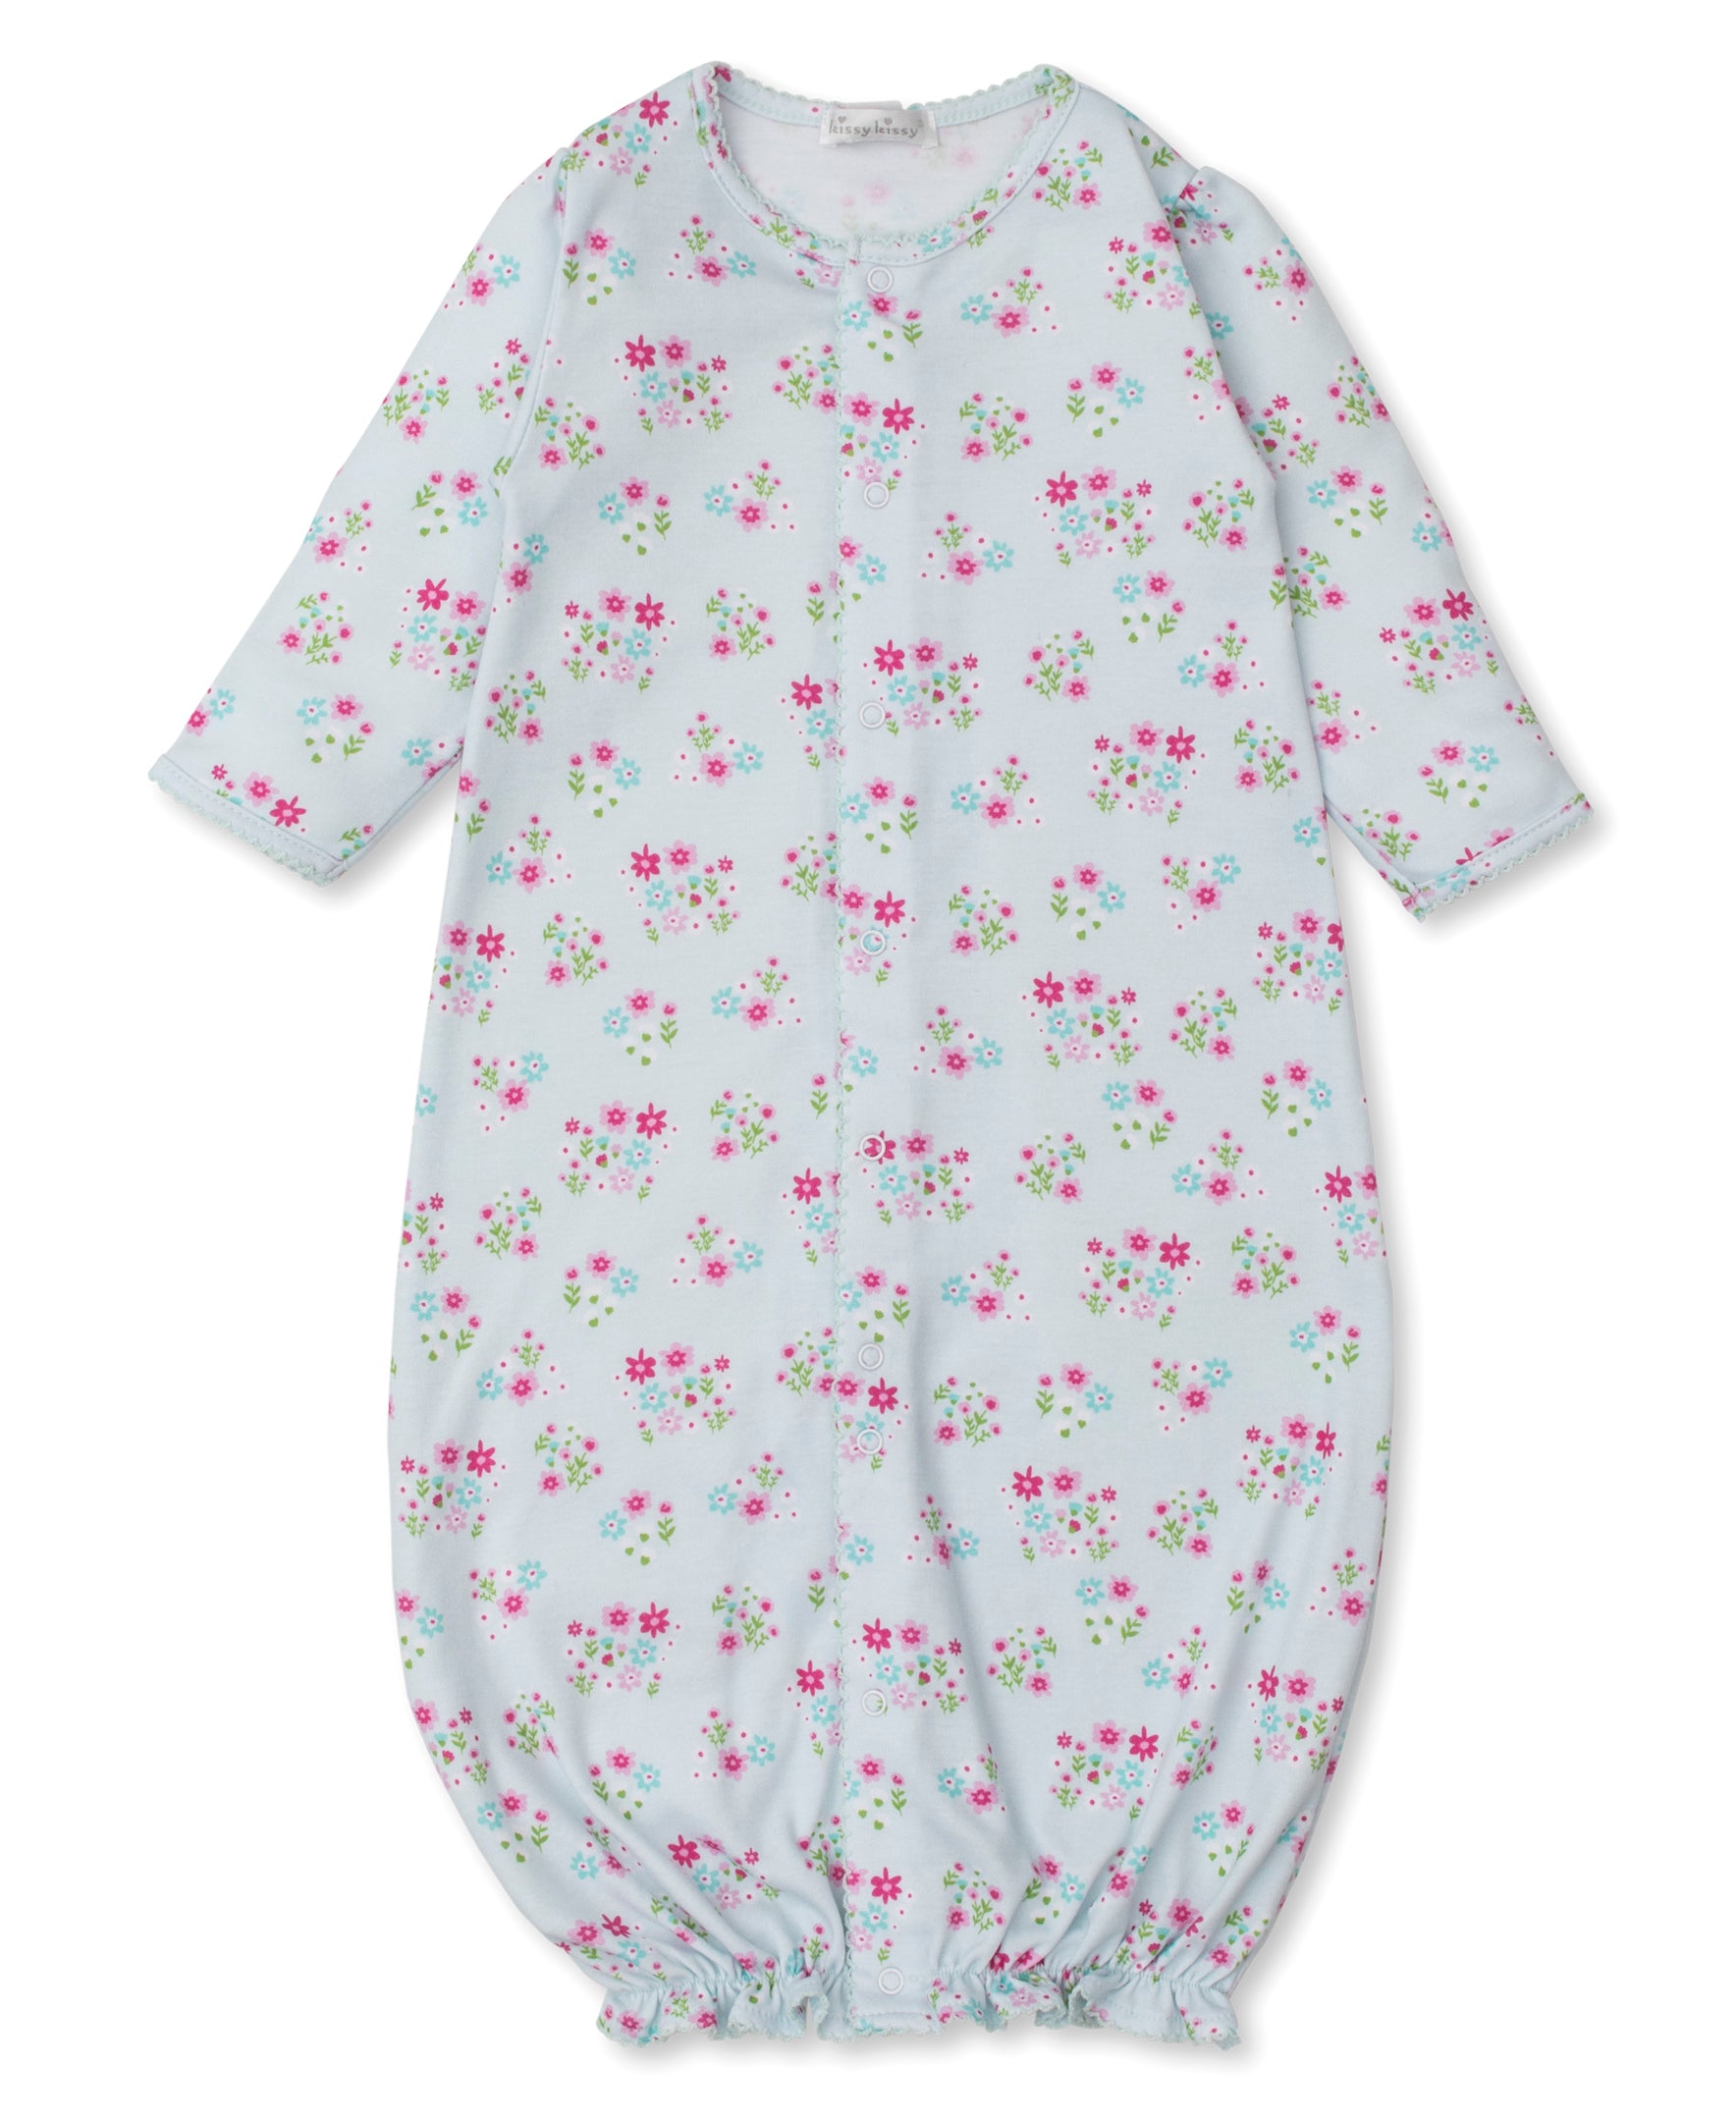 Bunny Blossoms Convertible Gown - Kissy Kissy